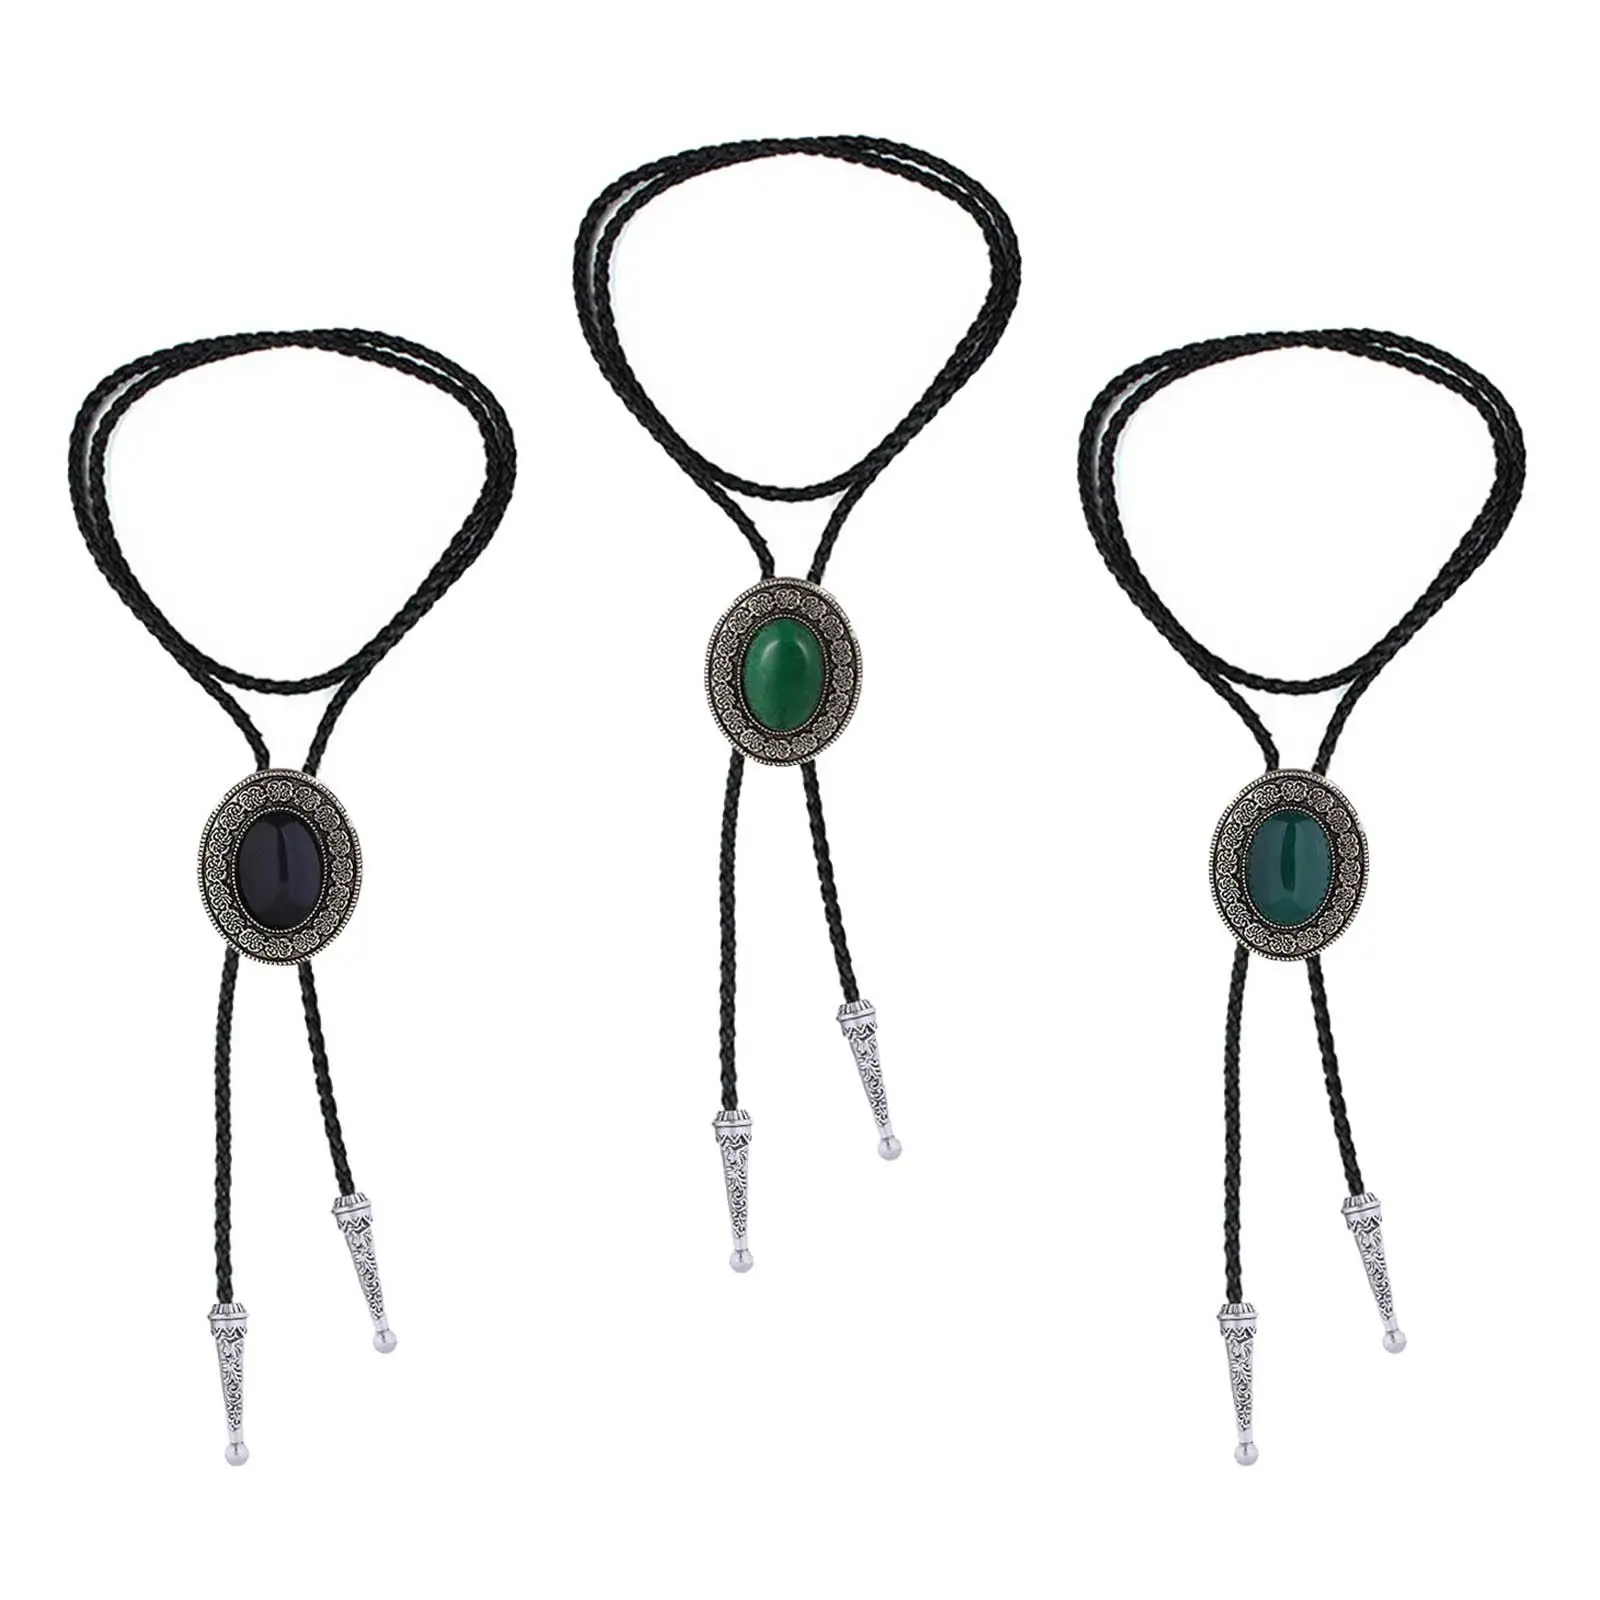 Bolo Tie for Men with Natural  Costume Accessories Round Shape Native Western Collar Rope   String Ties